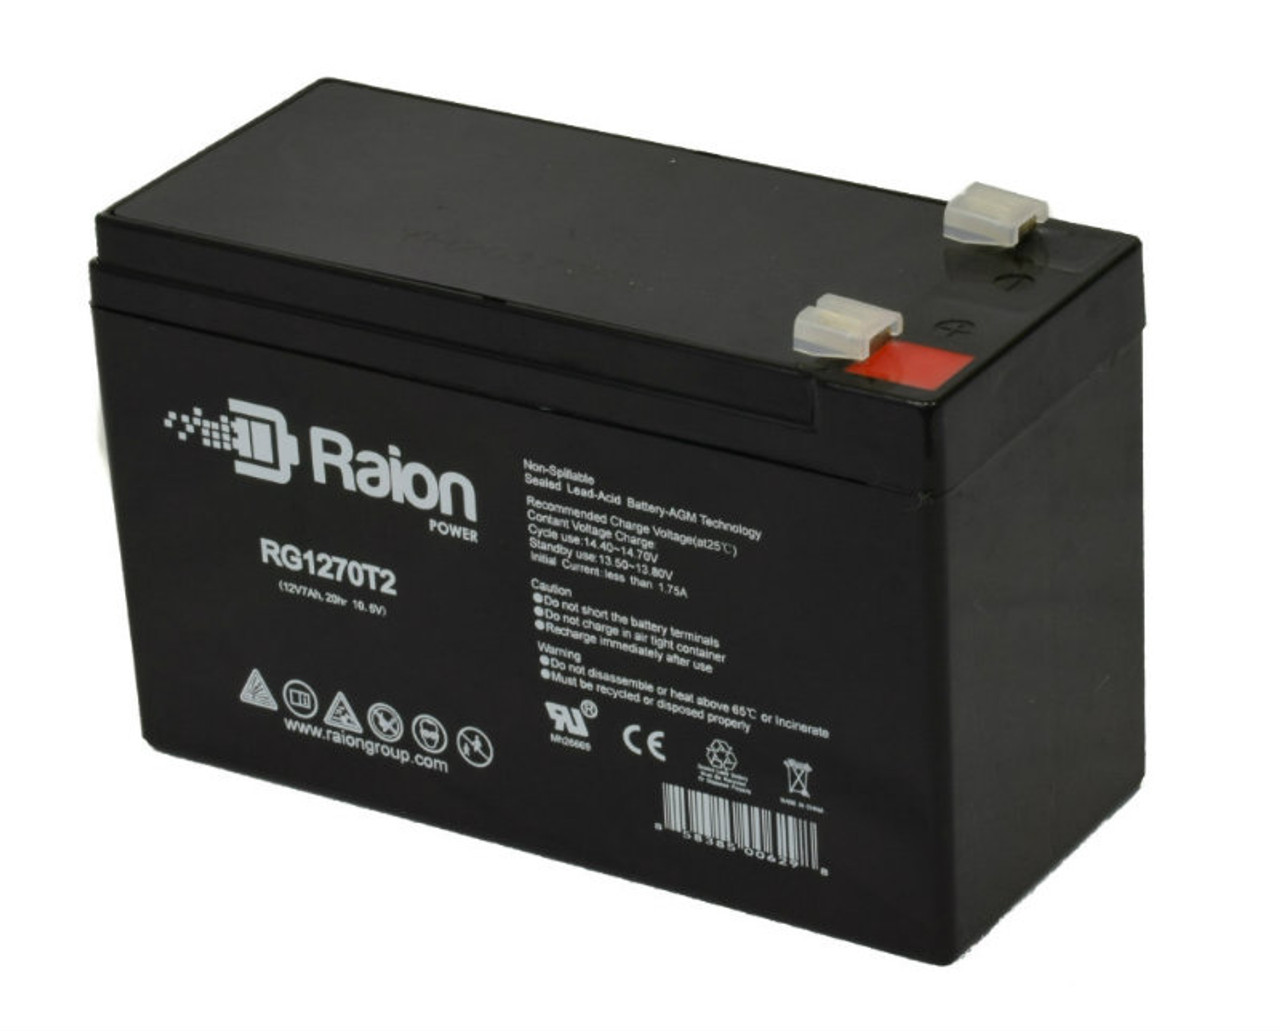 Raion Power RG1270T1 12V 7Ah Non-Spillable Replacement Battery for FengSheng FS12-7